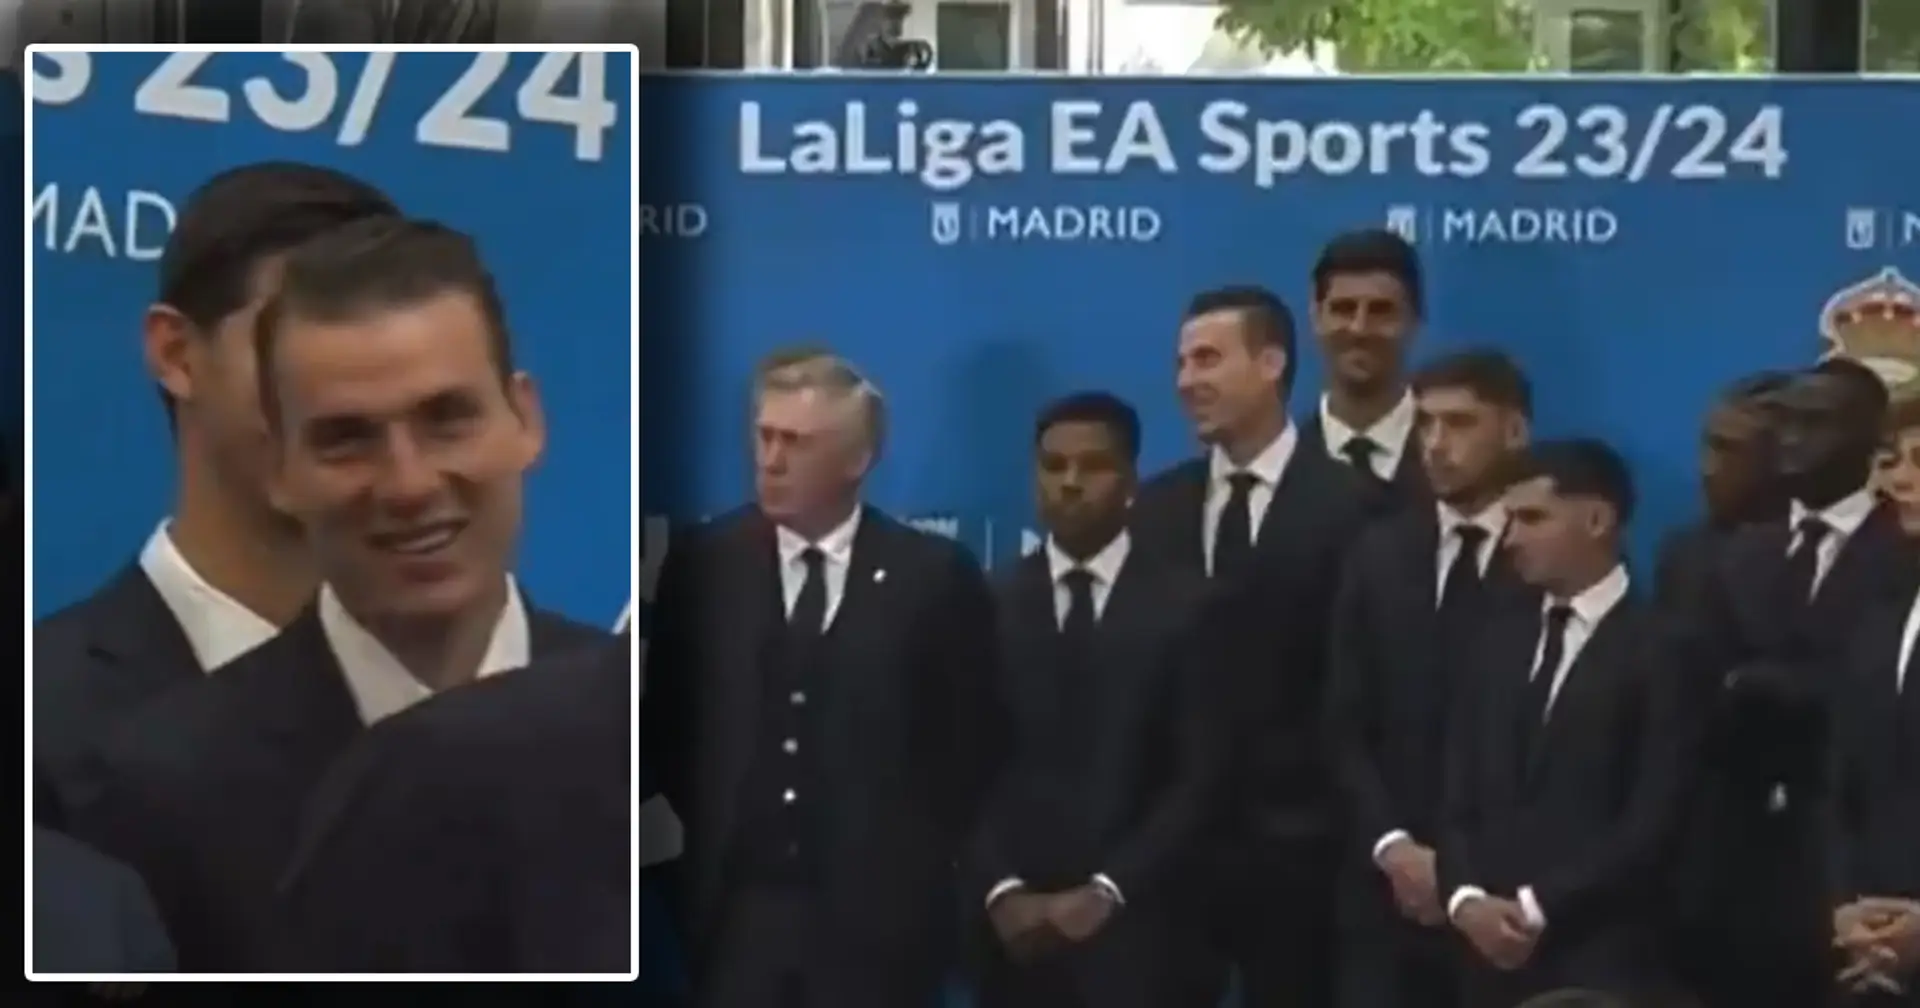 "A rare sight": Lunin could not hold back a laugh at the La Liga award ceremony